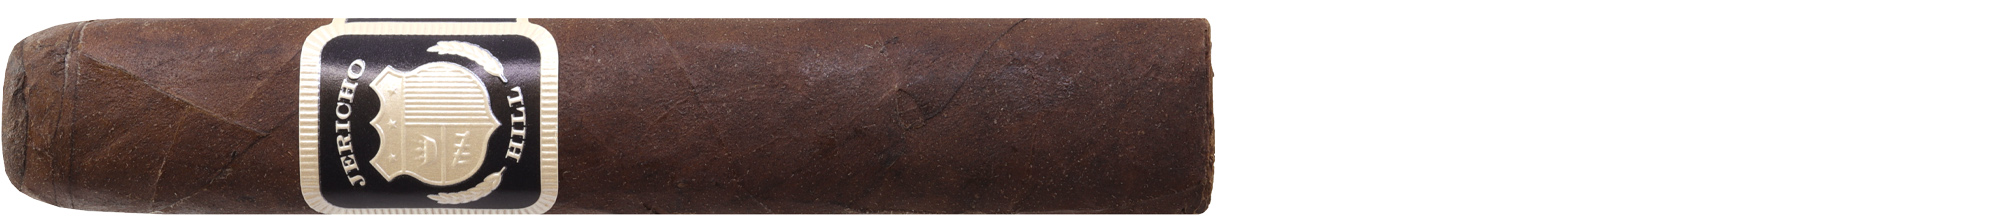 Crowned Heads Jericho Hill OBS Robusto
